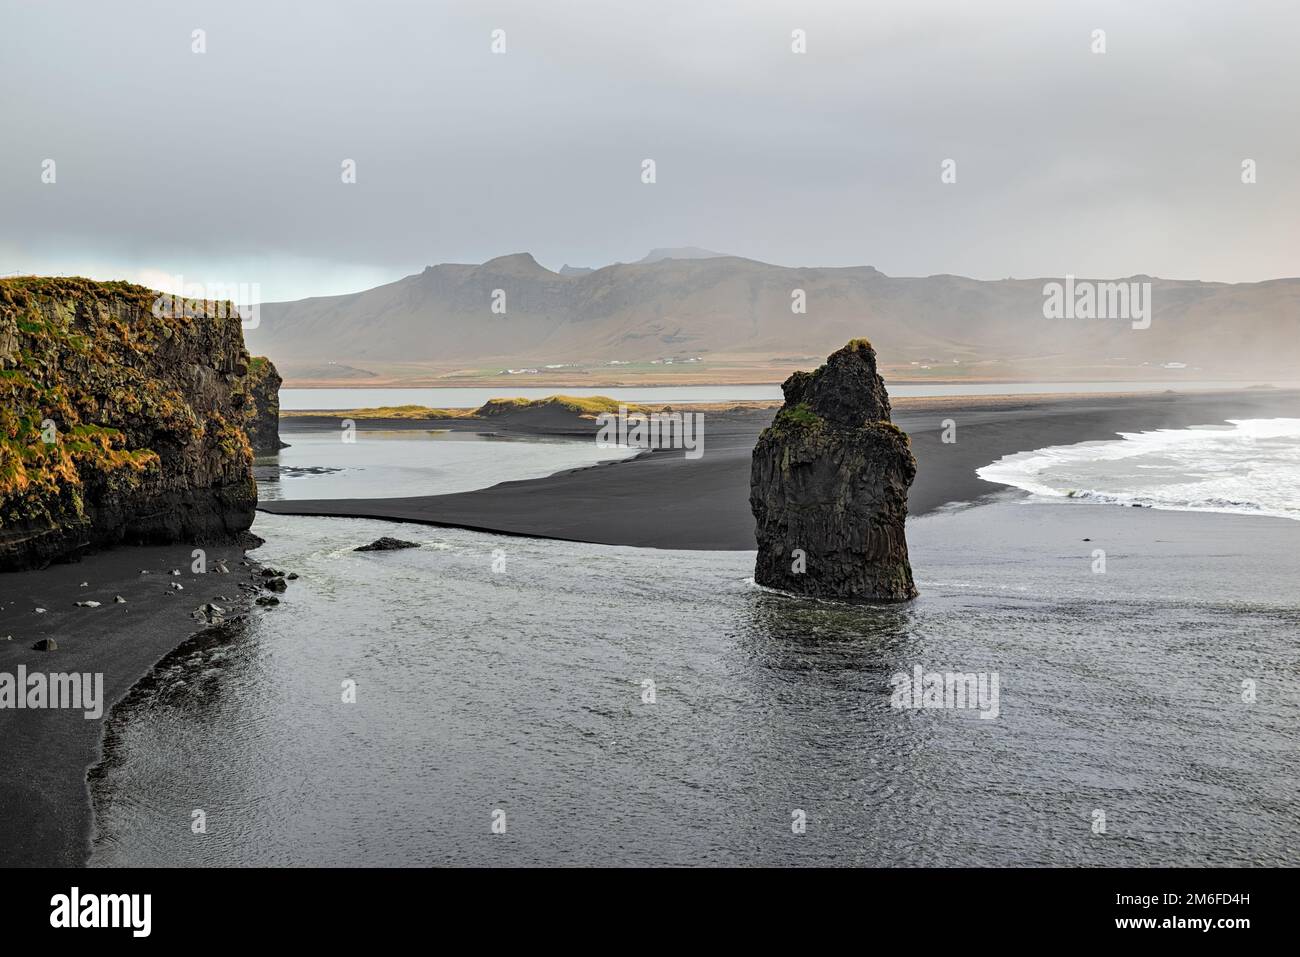 Rock formation at Dyrholaey, Iceland Stock Photo